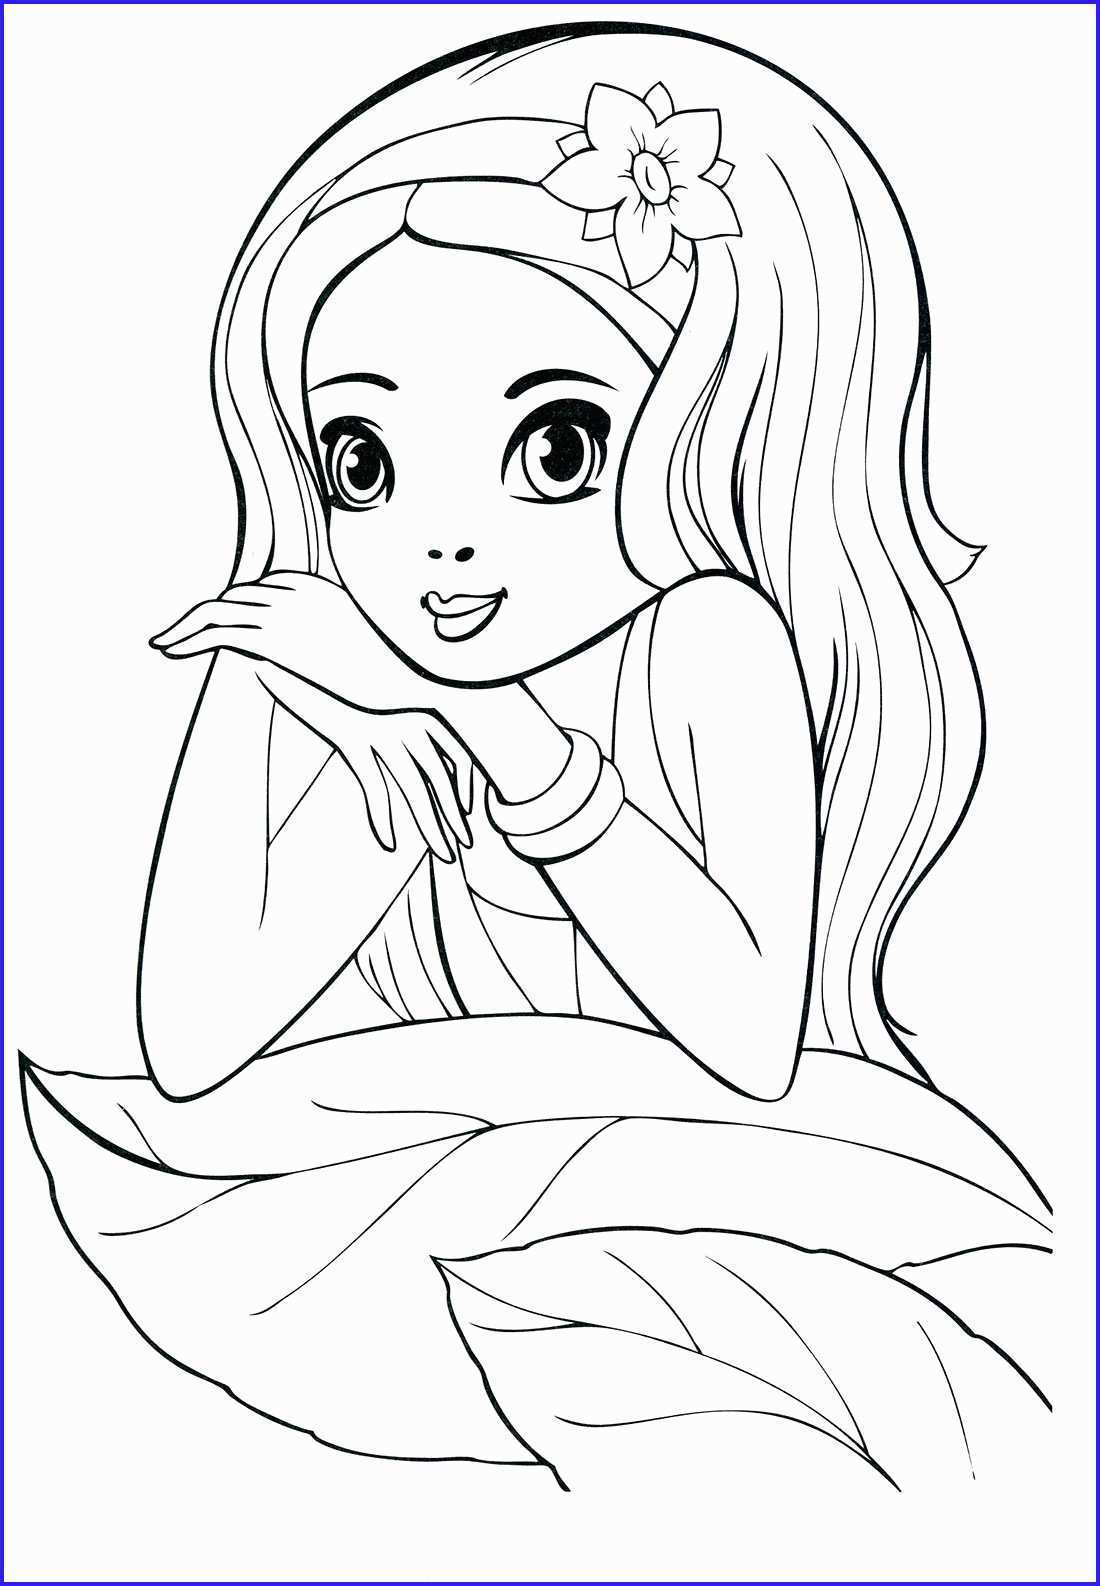 Coloring Pages For 10 Year Old Girls Fresh Coloring Pages For 9 Year Olds Girls Coloring Pages